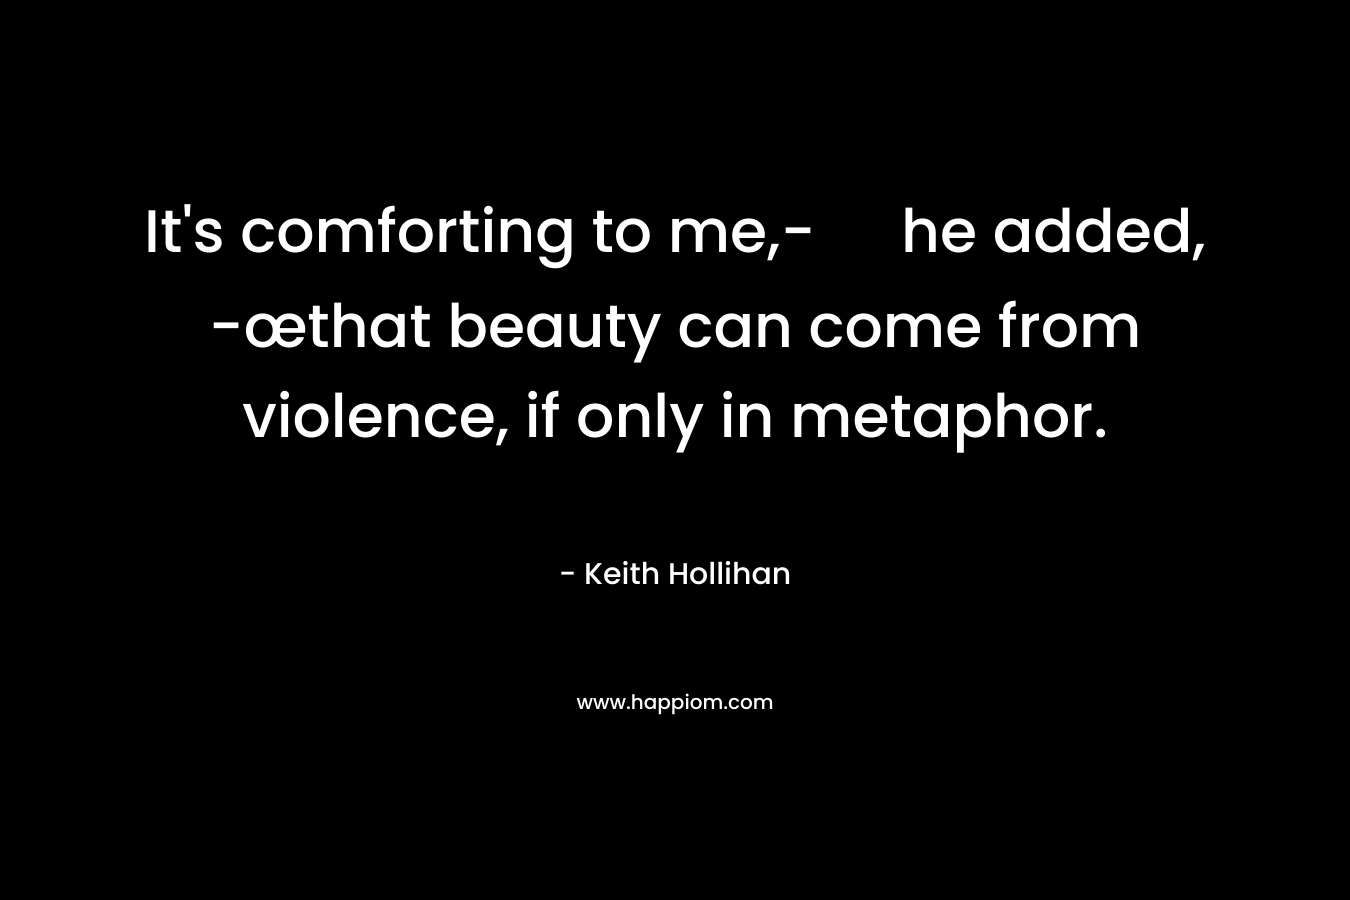 It’s comforting to me,- he added, -œthat beauty can come from violence, if only in metaphor. – Keith Hollihan